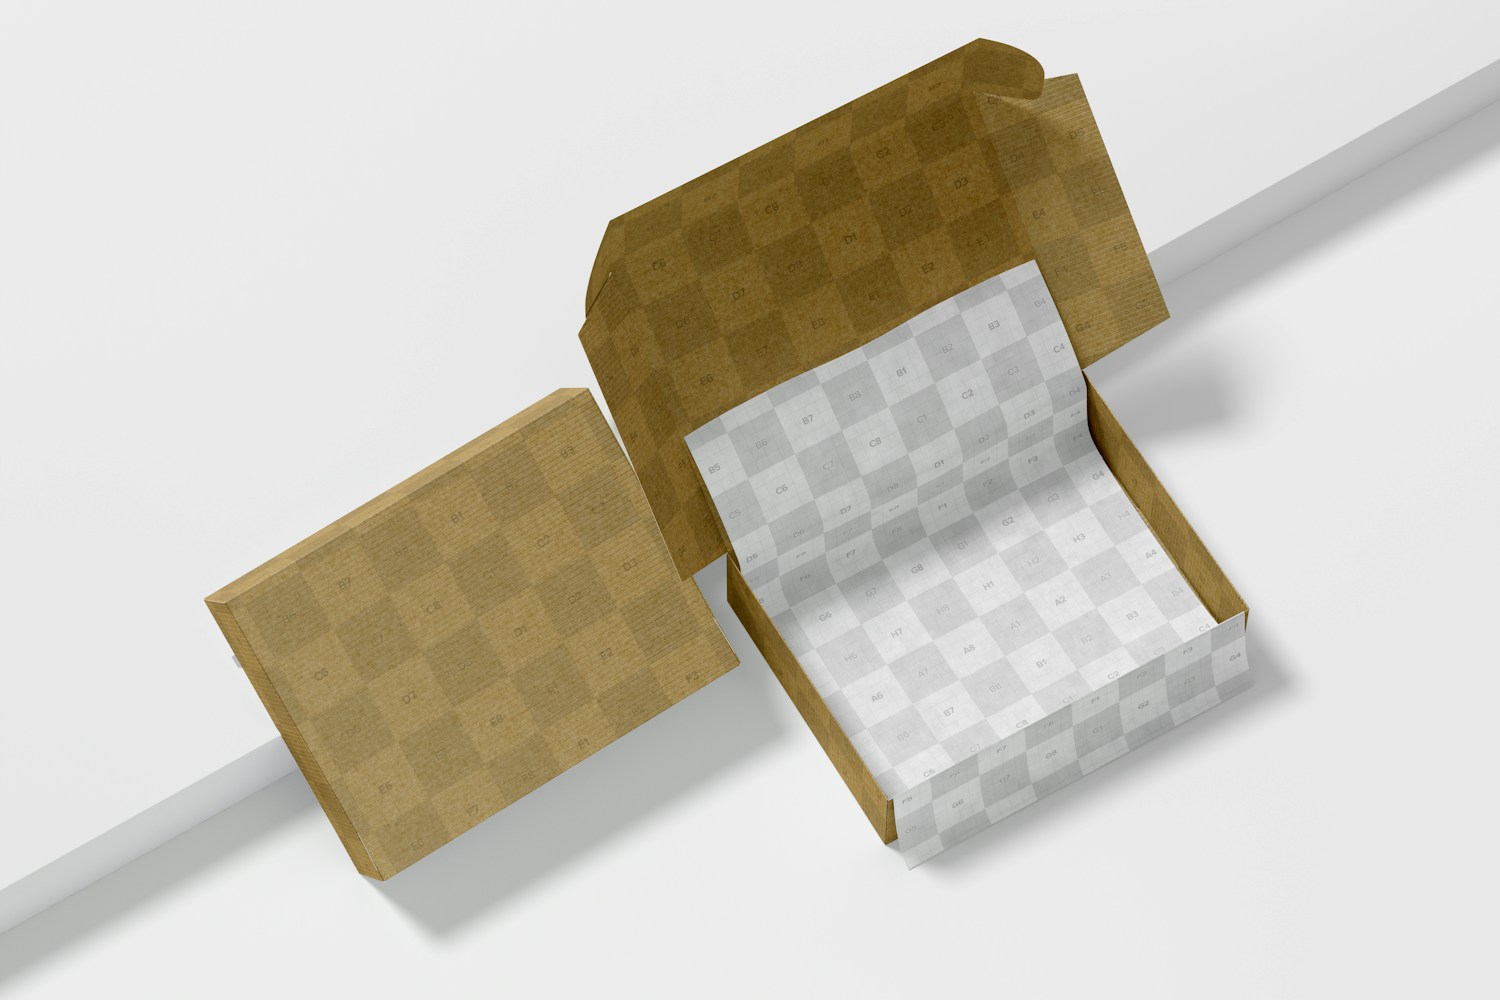 Full customizable area to showcase your packaging design.